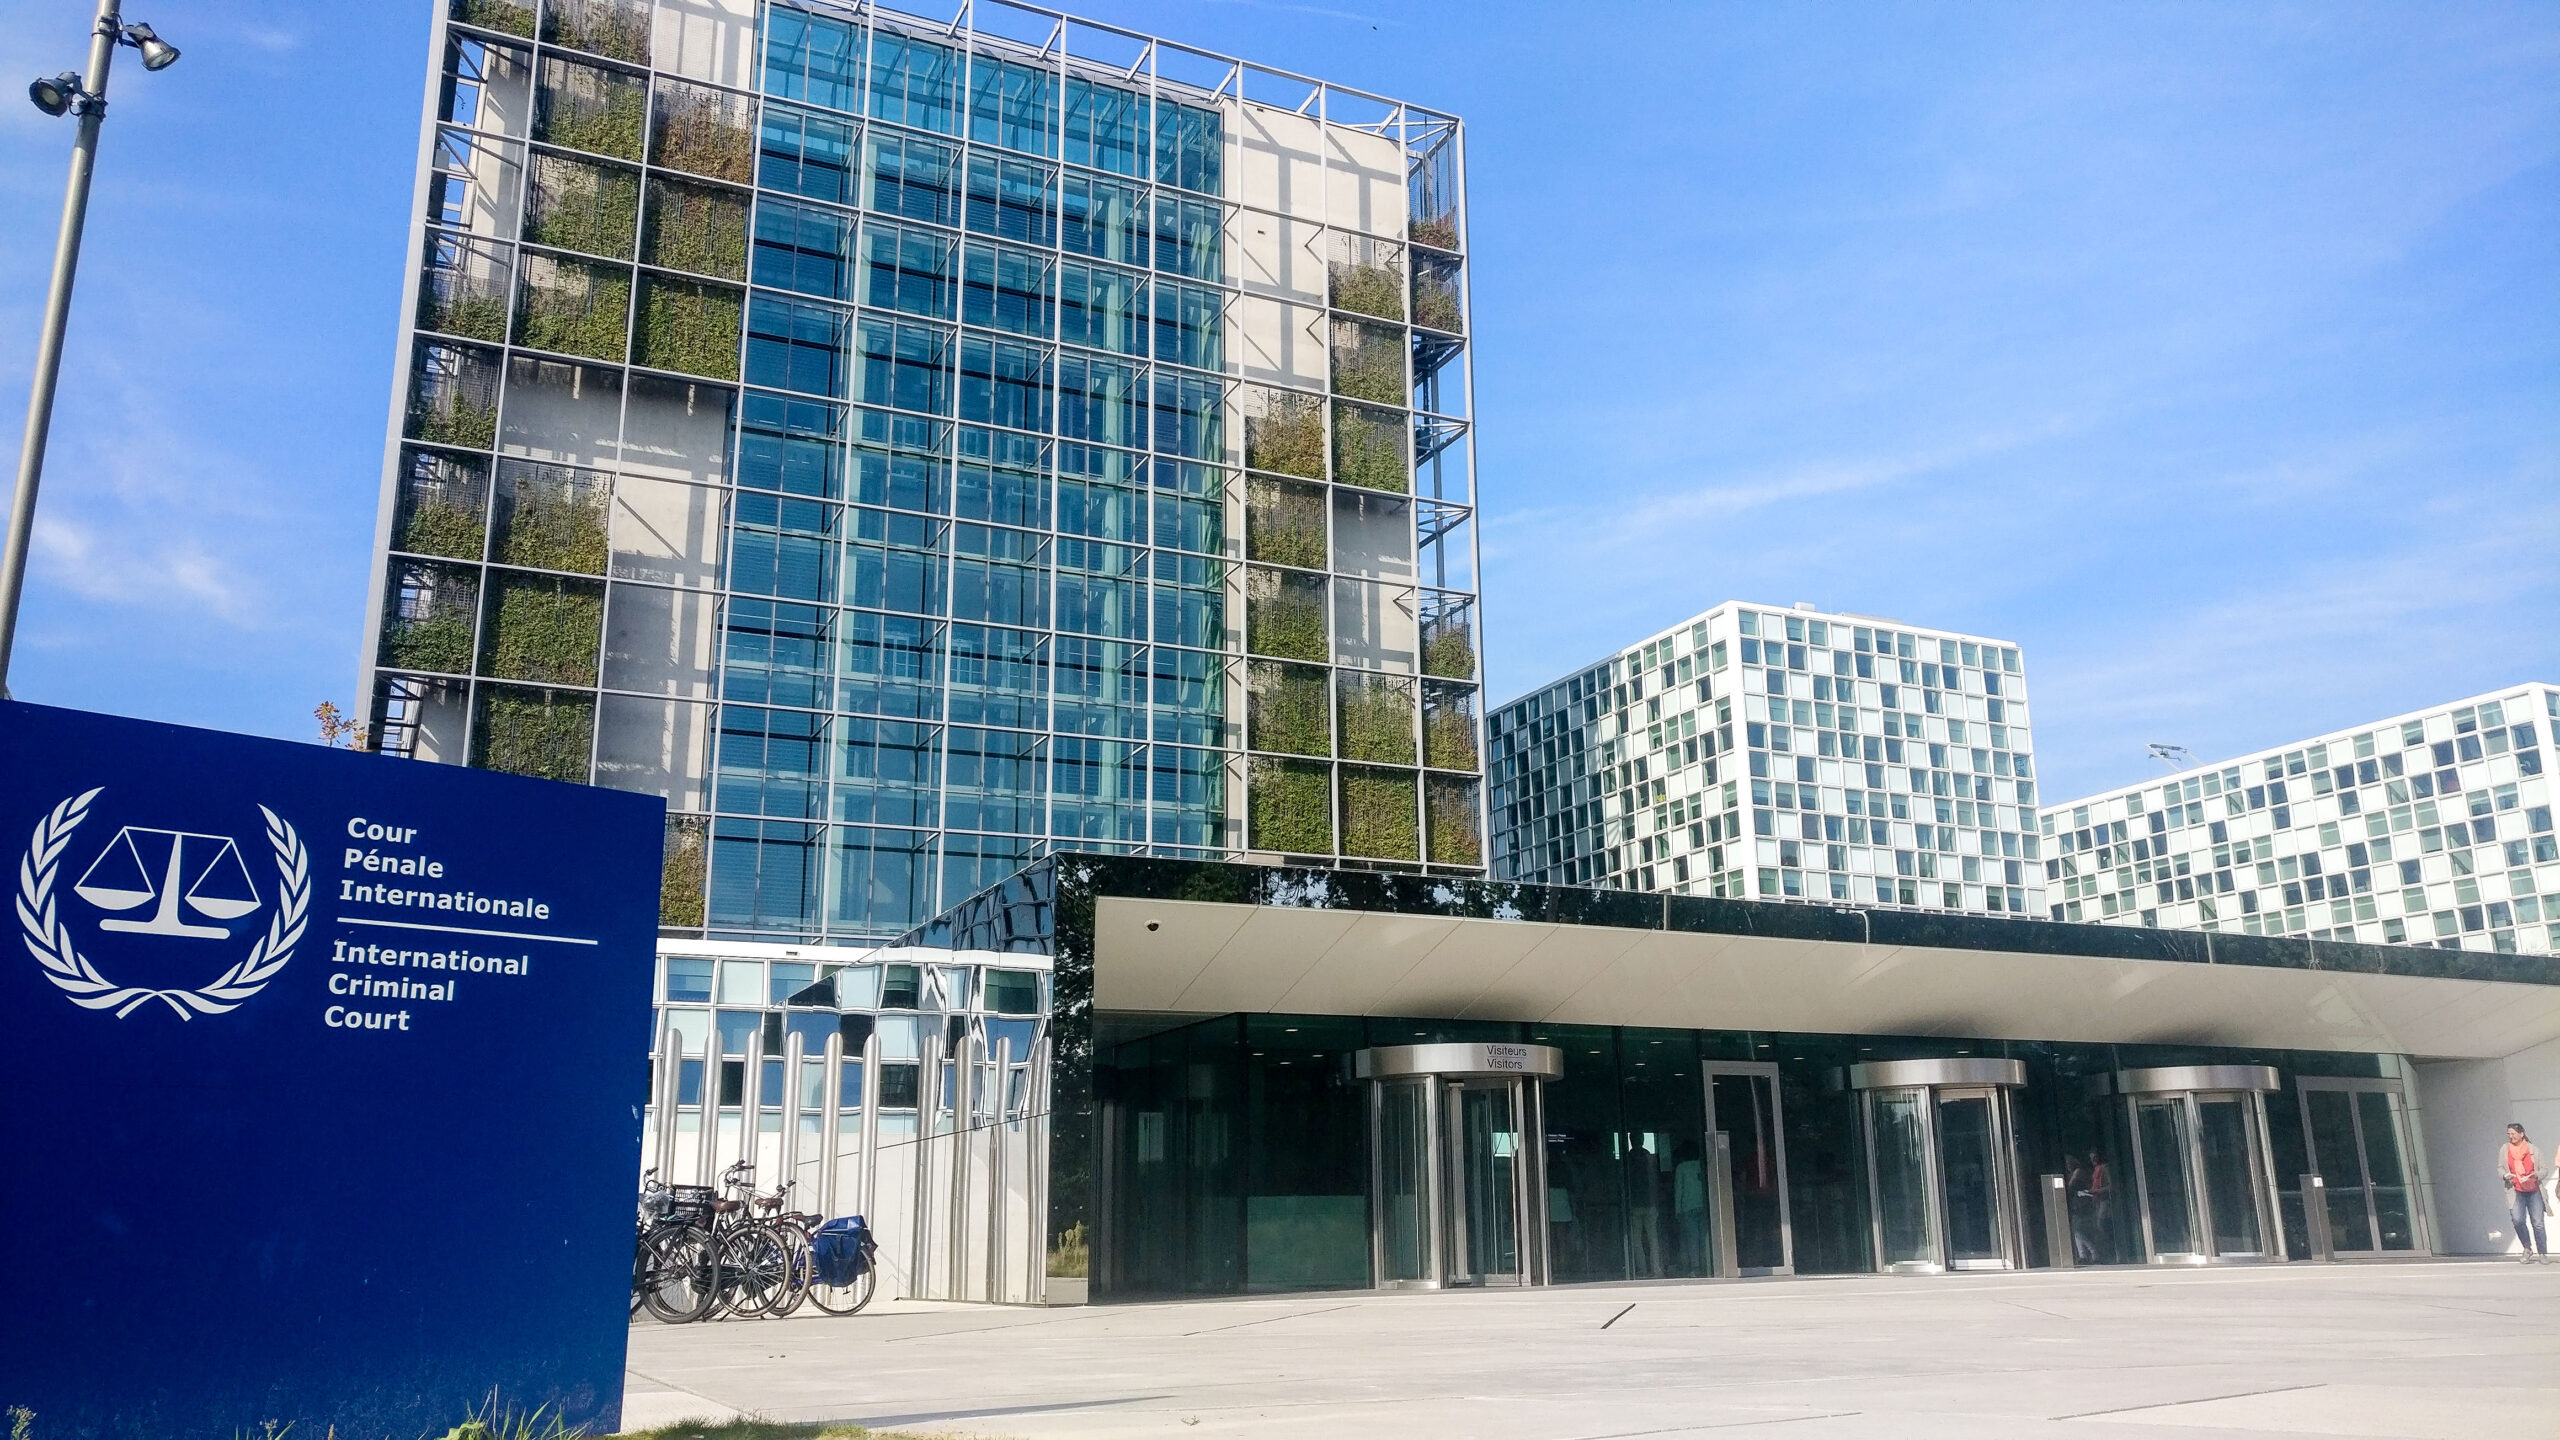 This is a photo of the International Criminal Court building in Geneva. The sign is clearly visible, in front of the building.